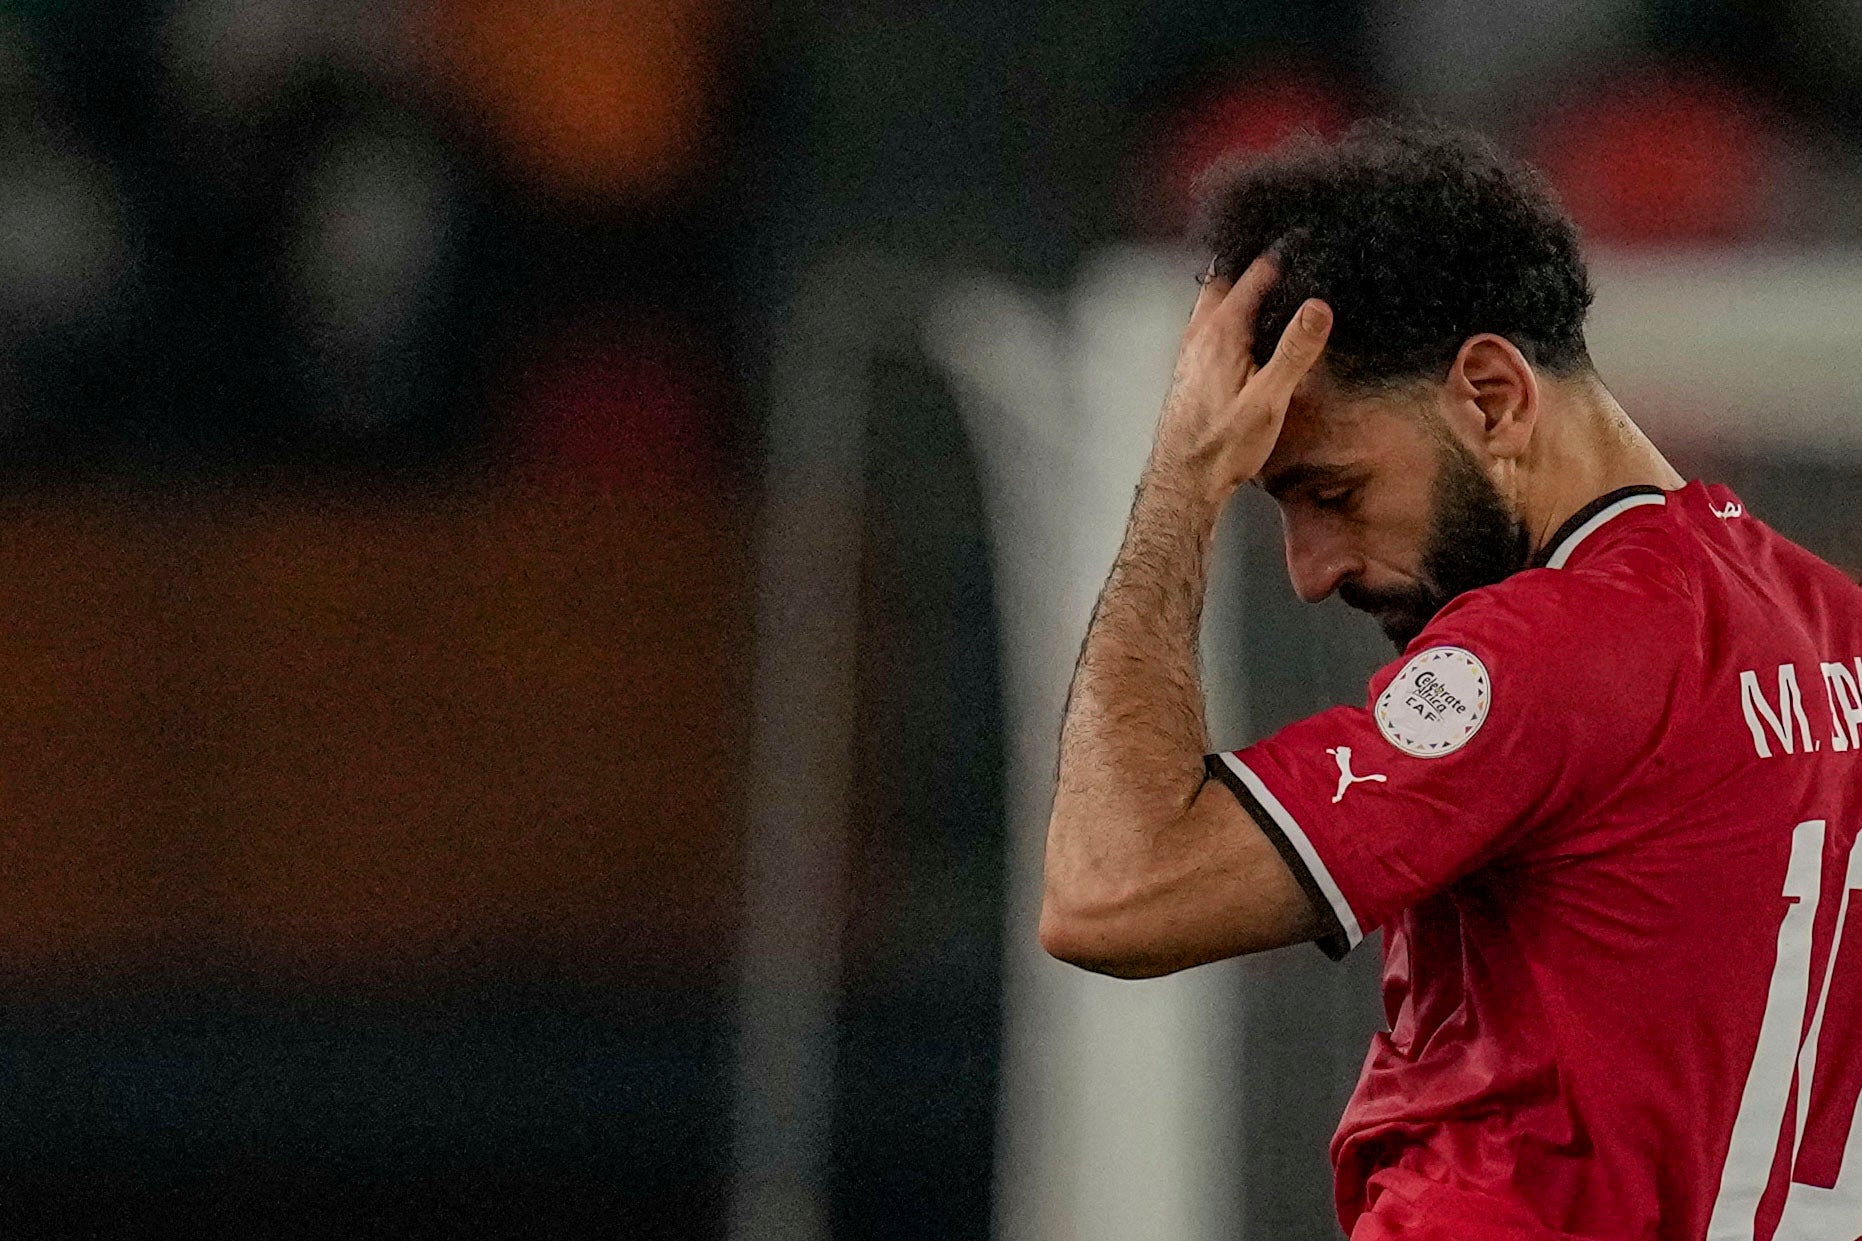 Mohamed Salah is getting treatment at Liverpool